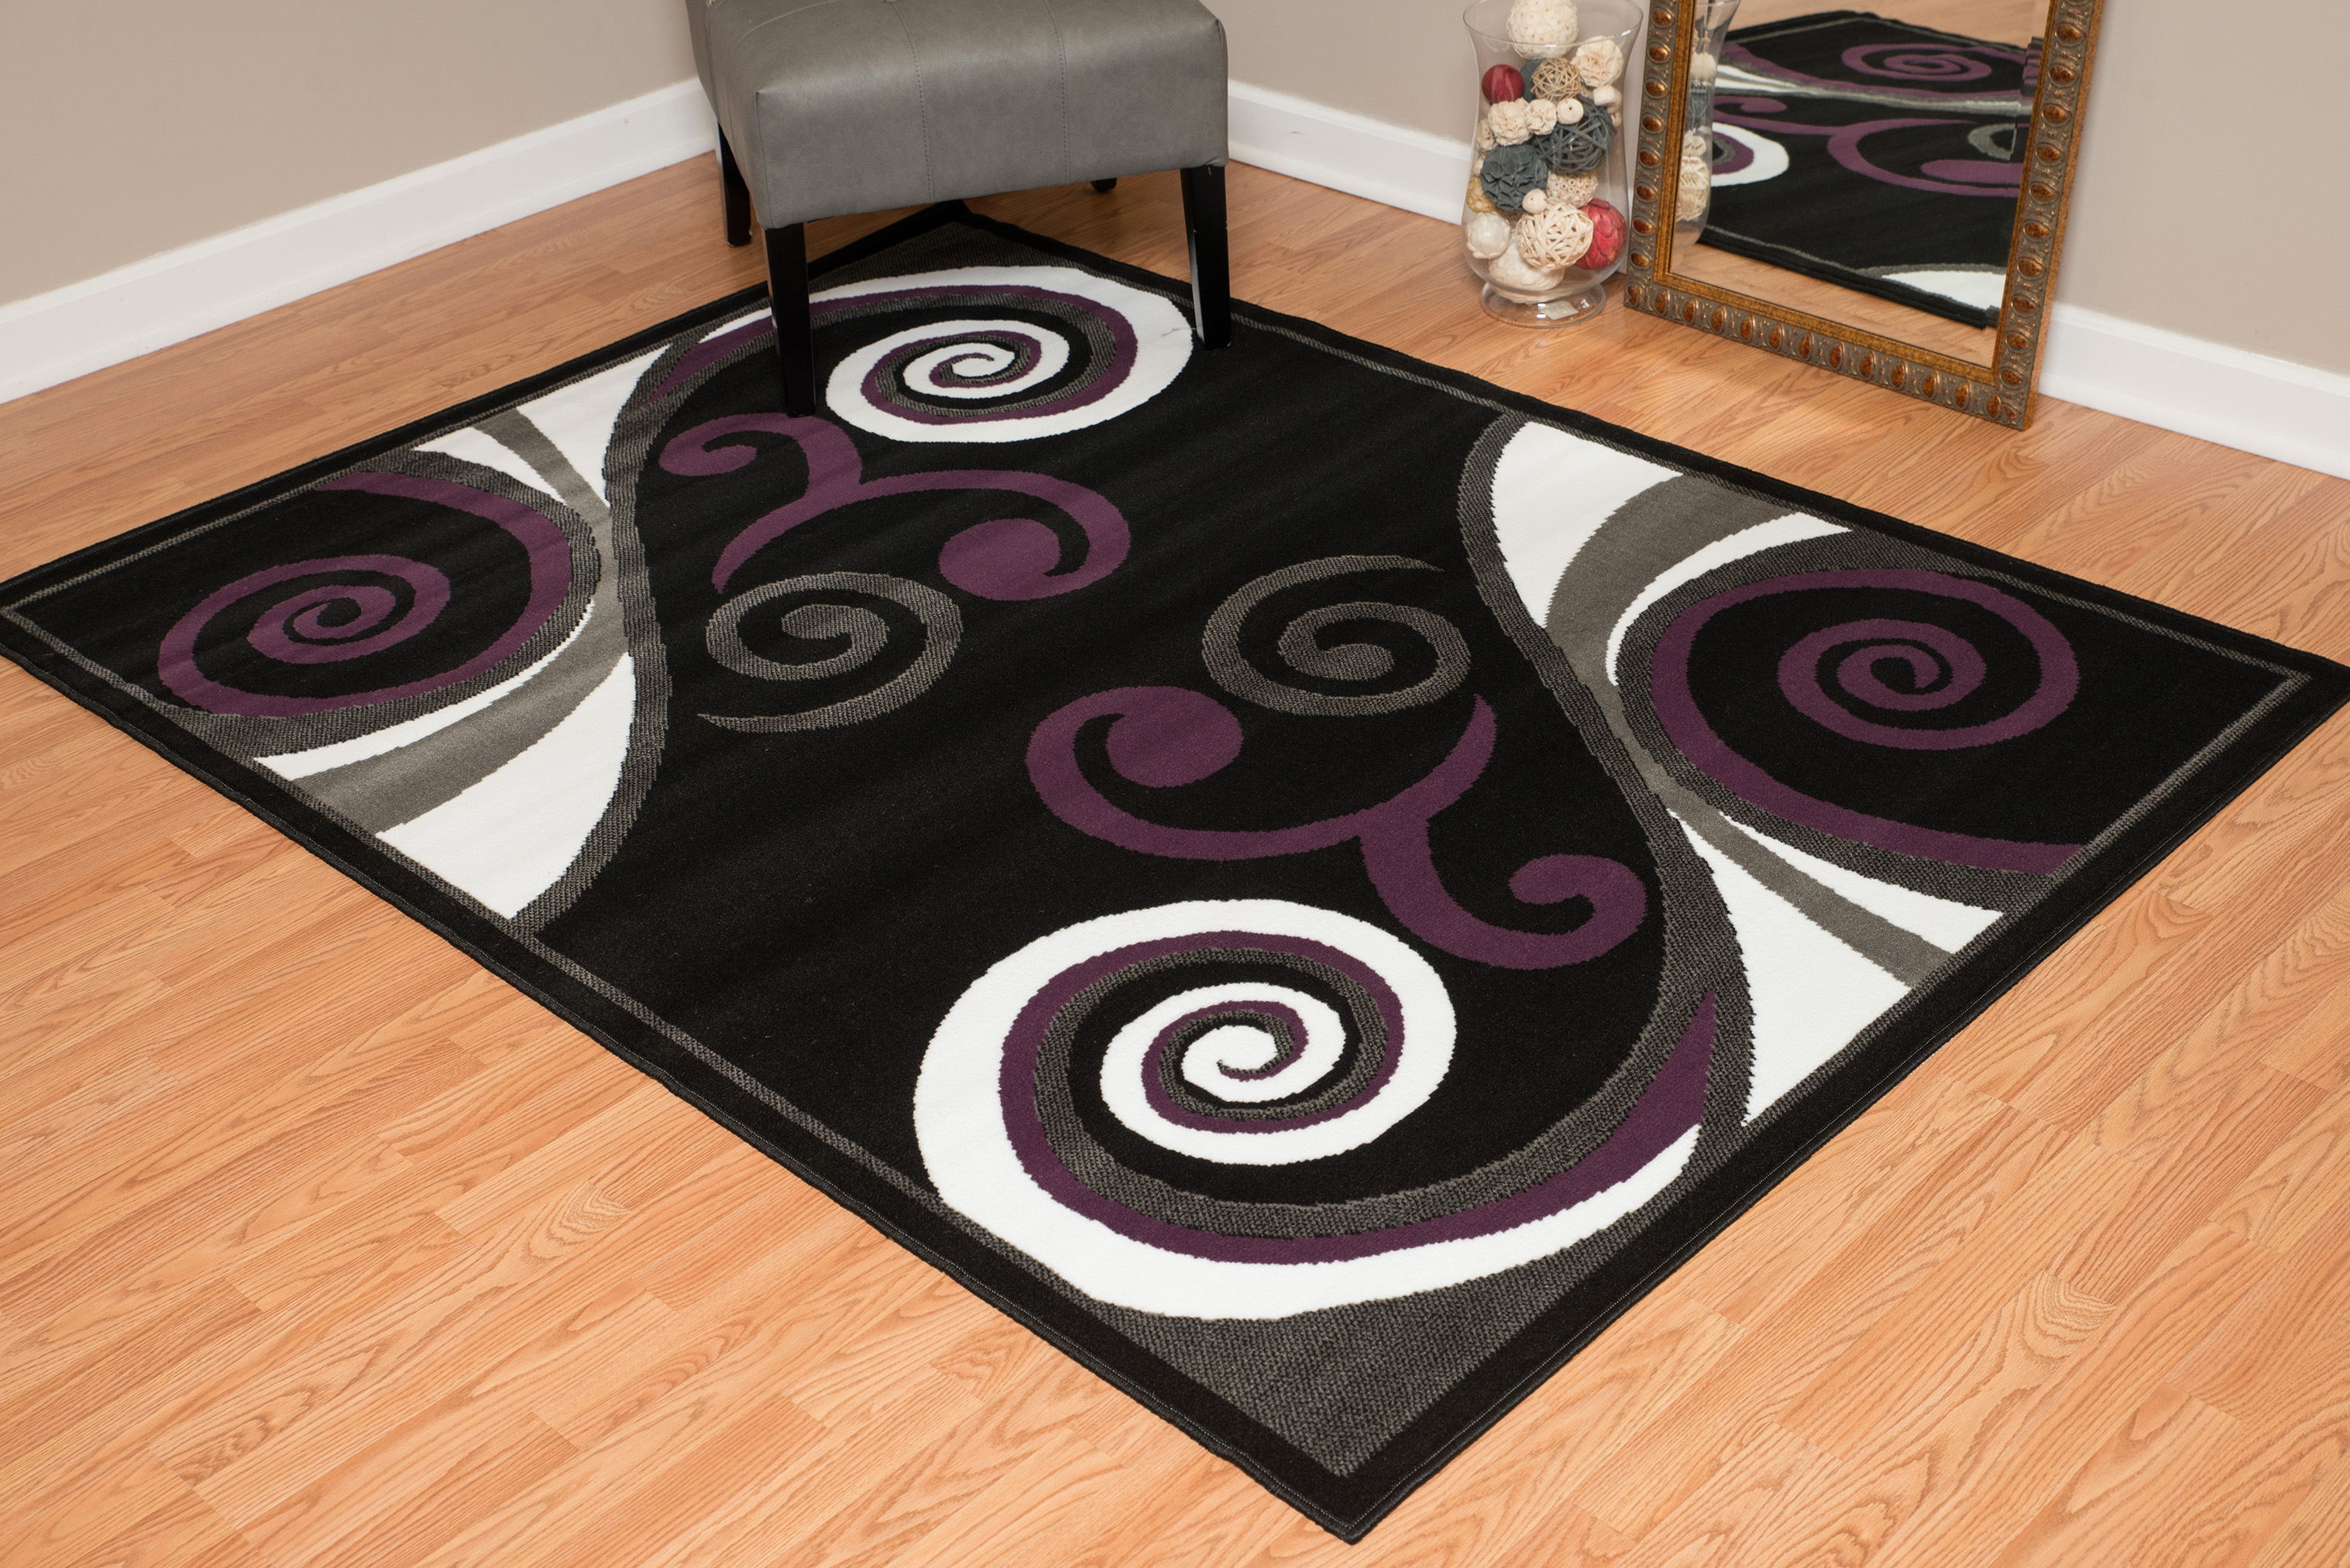 Designer Home Soft Transitional Indoor Modern Area Rug Curvy Swirls  - Actual Size: 7' 10" x 10' 6" Rectangle (Black) - image 1 of 5